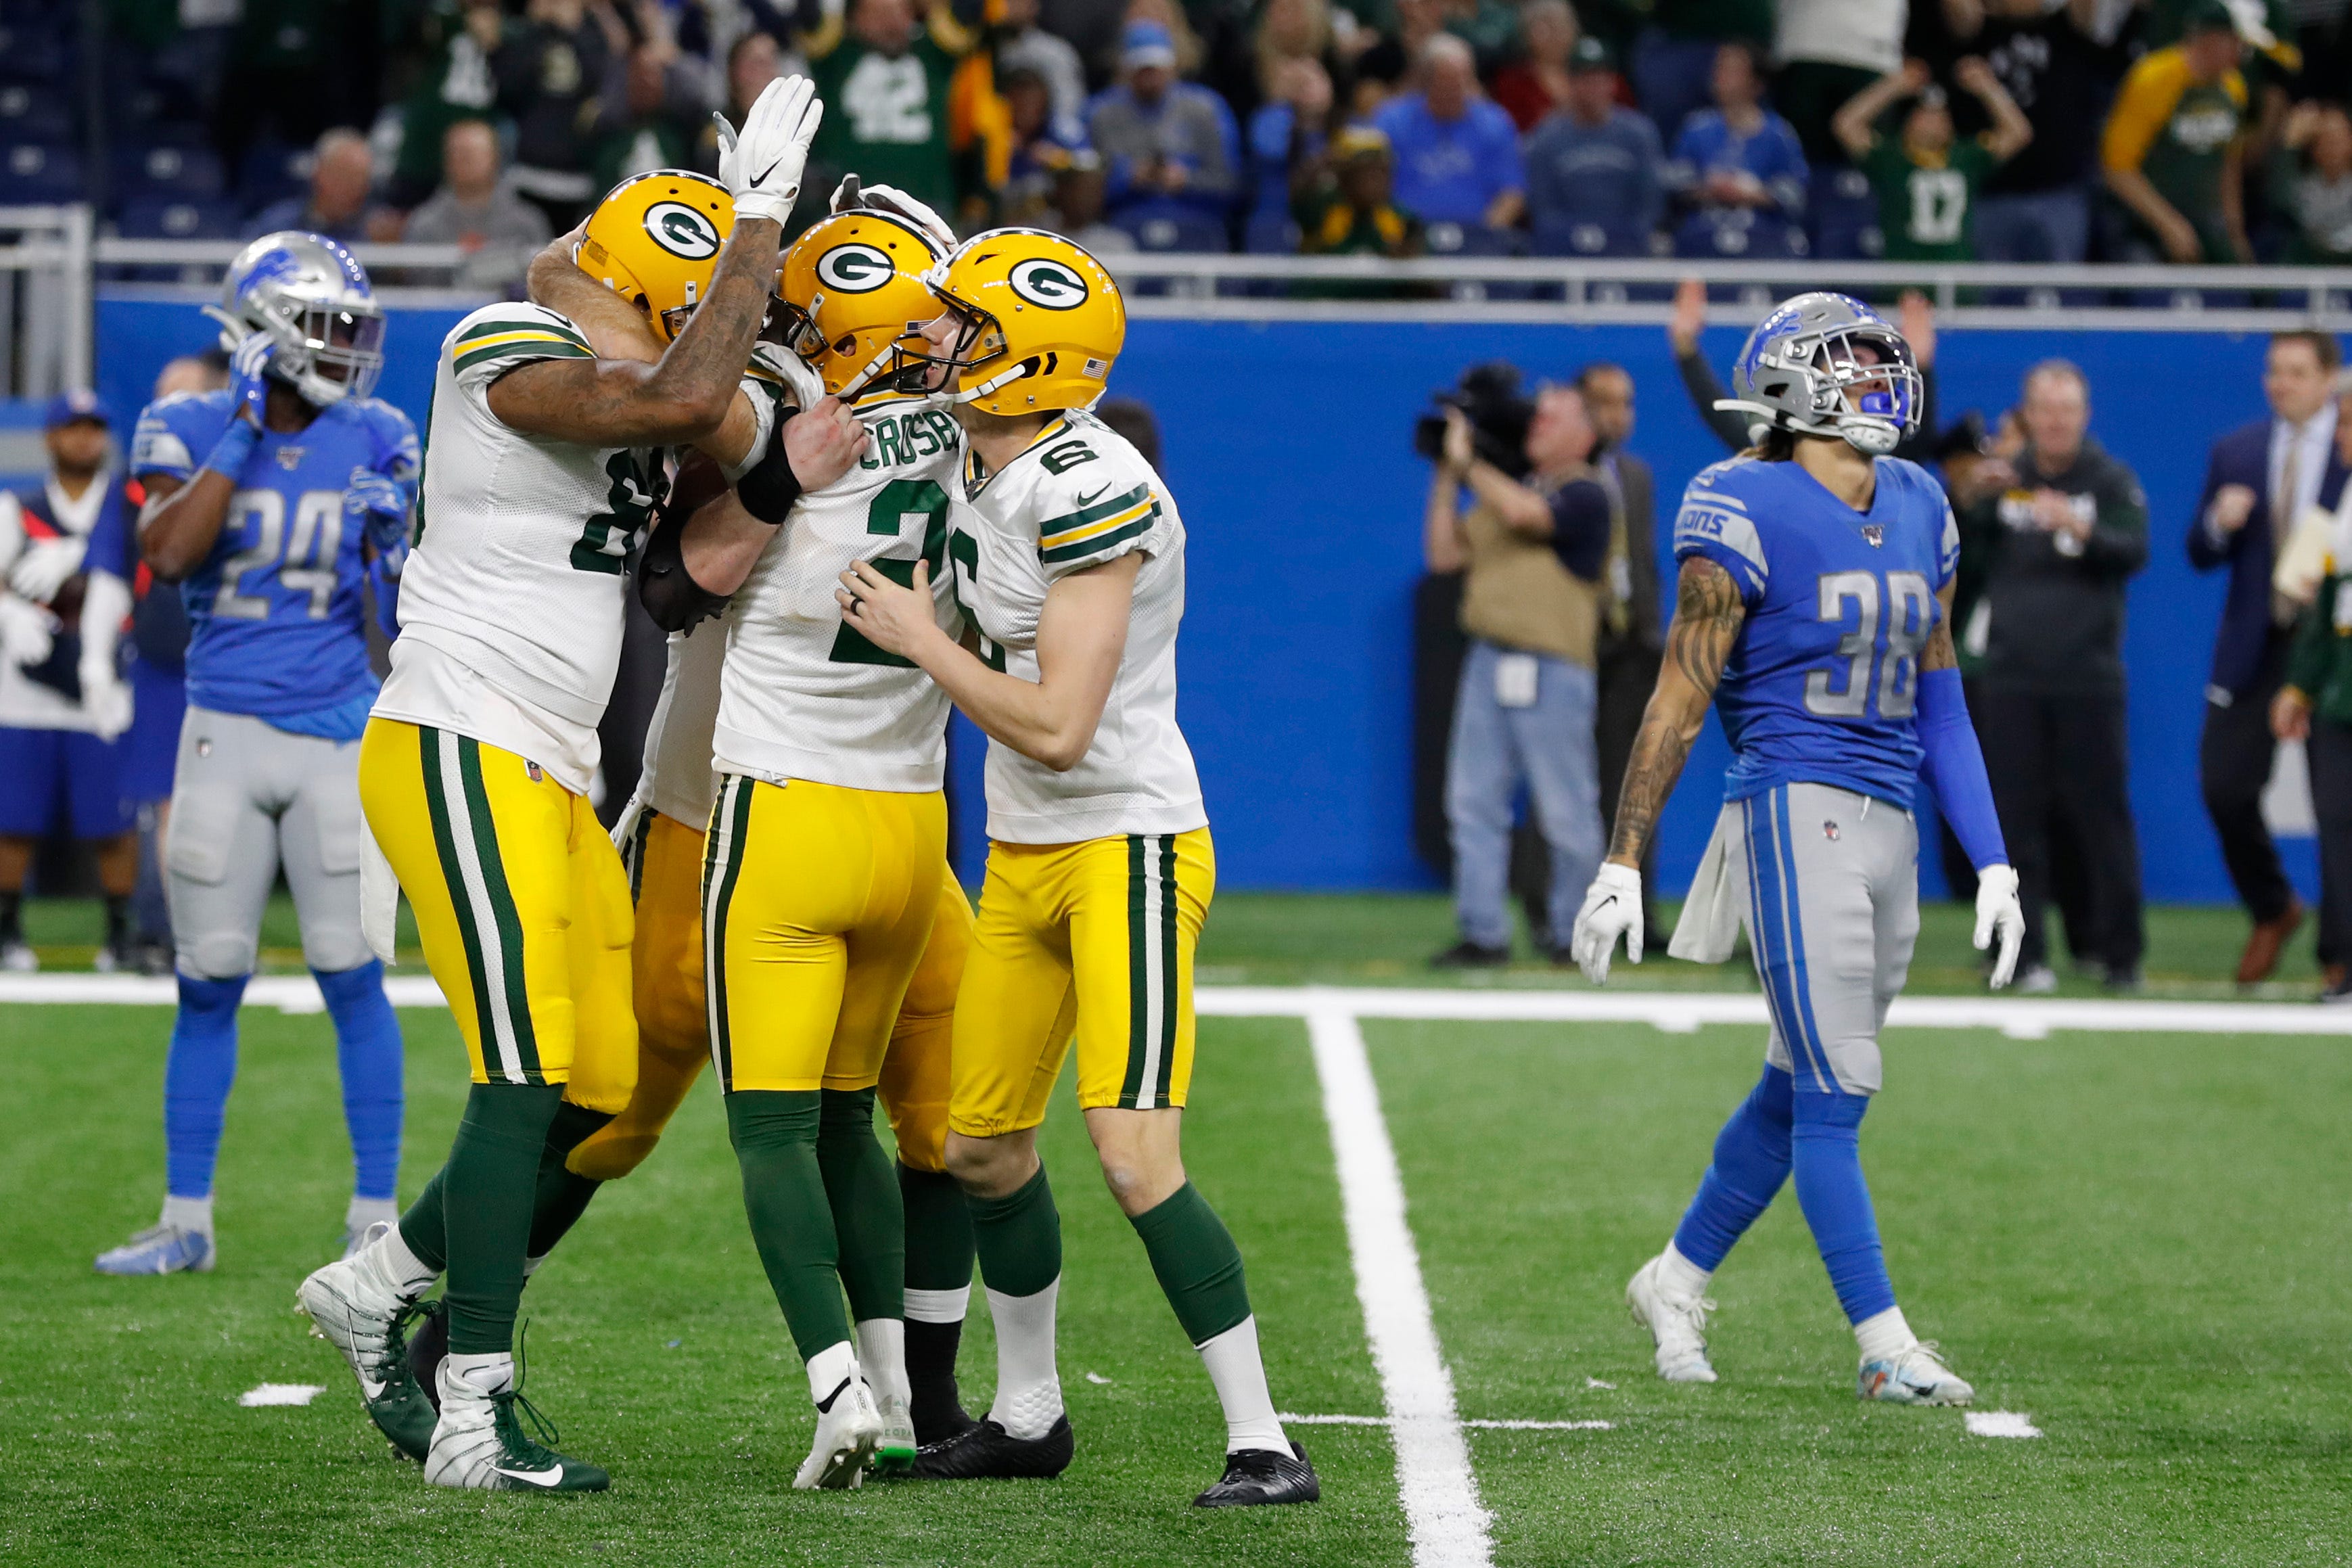 Green Bay Packers surround kicker Mason Crosby (2) after his winning field goal during the second half of an NFL football game against the Detroit Lions, Sunday, Dec. 29, 2019, in Detroit. (AP Photo/Carlos Osorio)